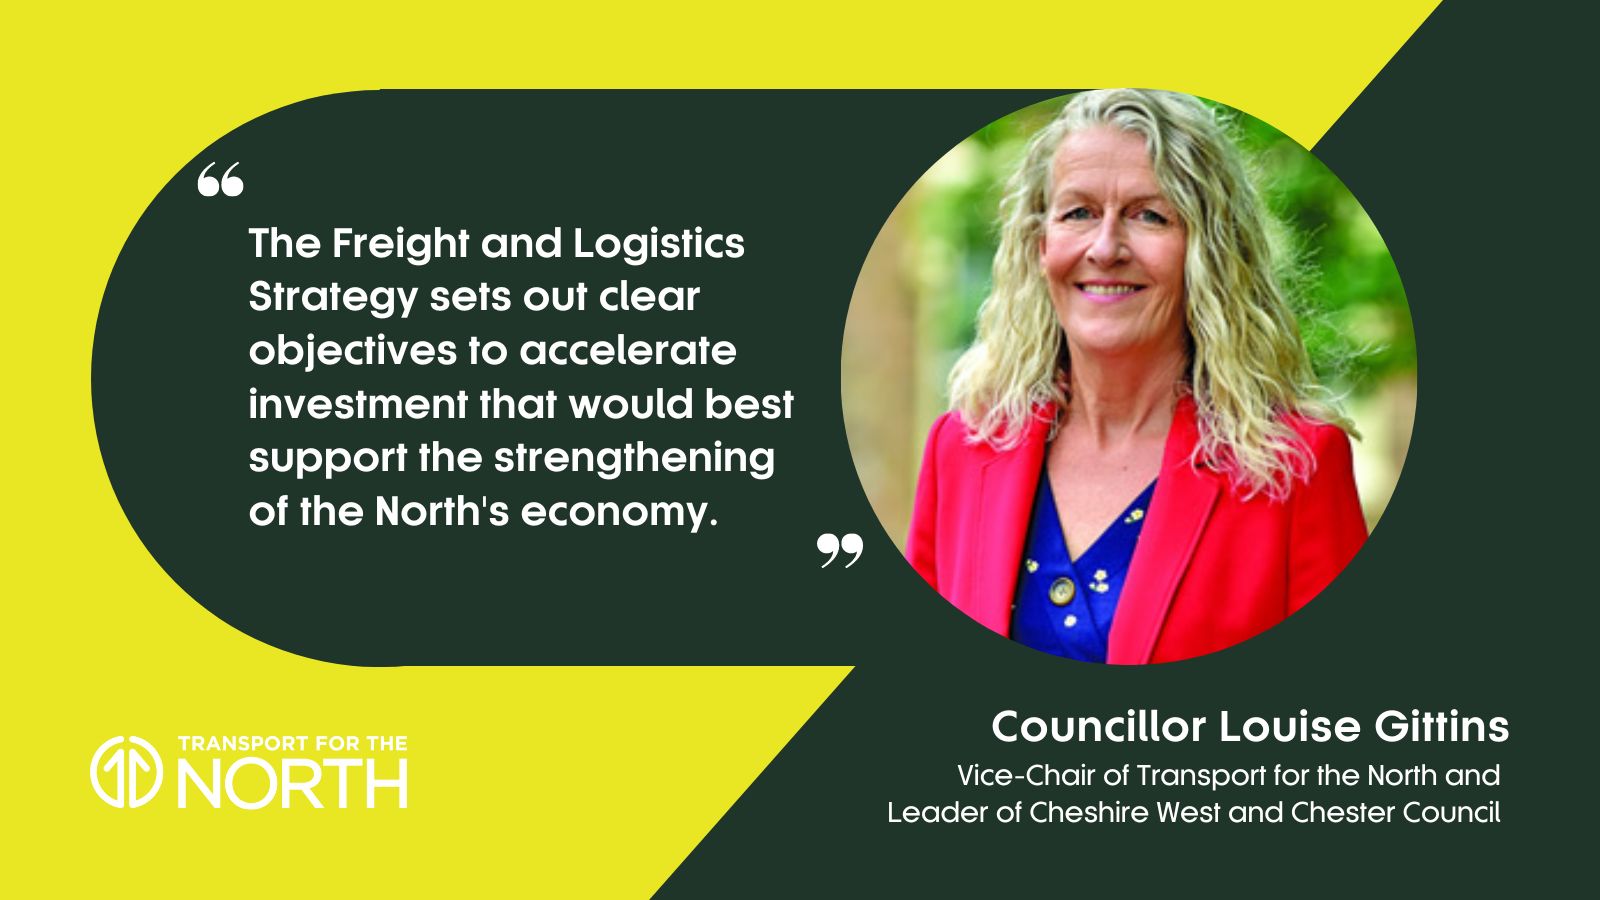 Cllr Louise Gittins on TfN's Freight and Logistics strategy